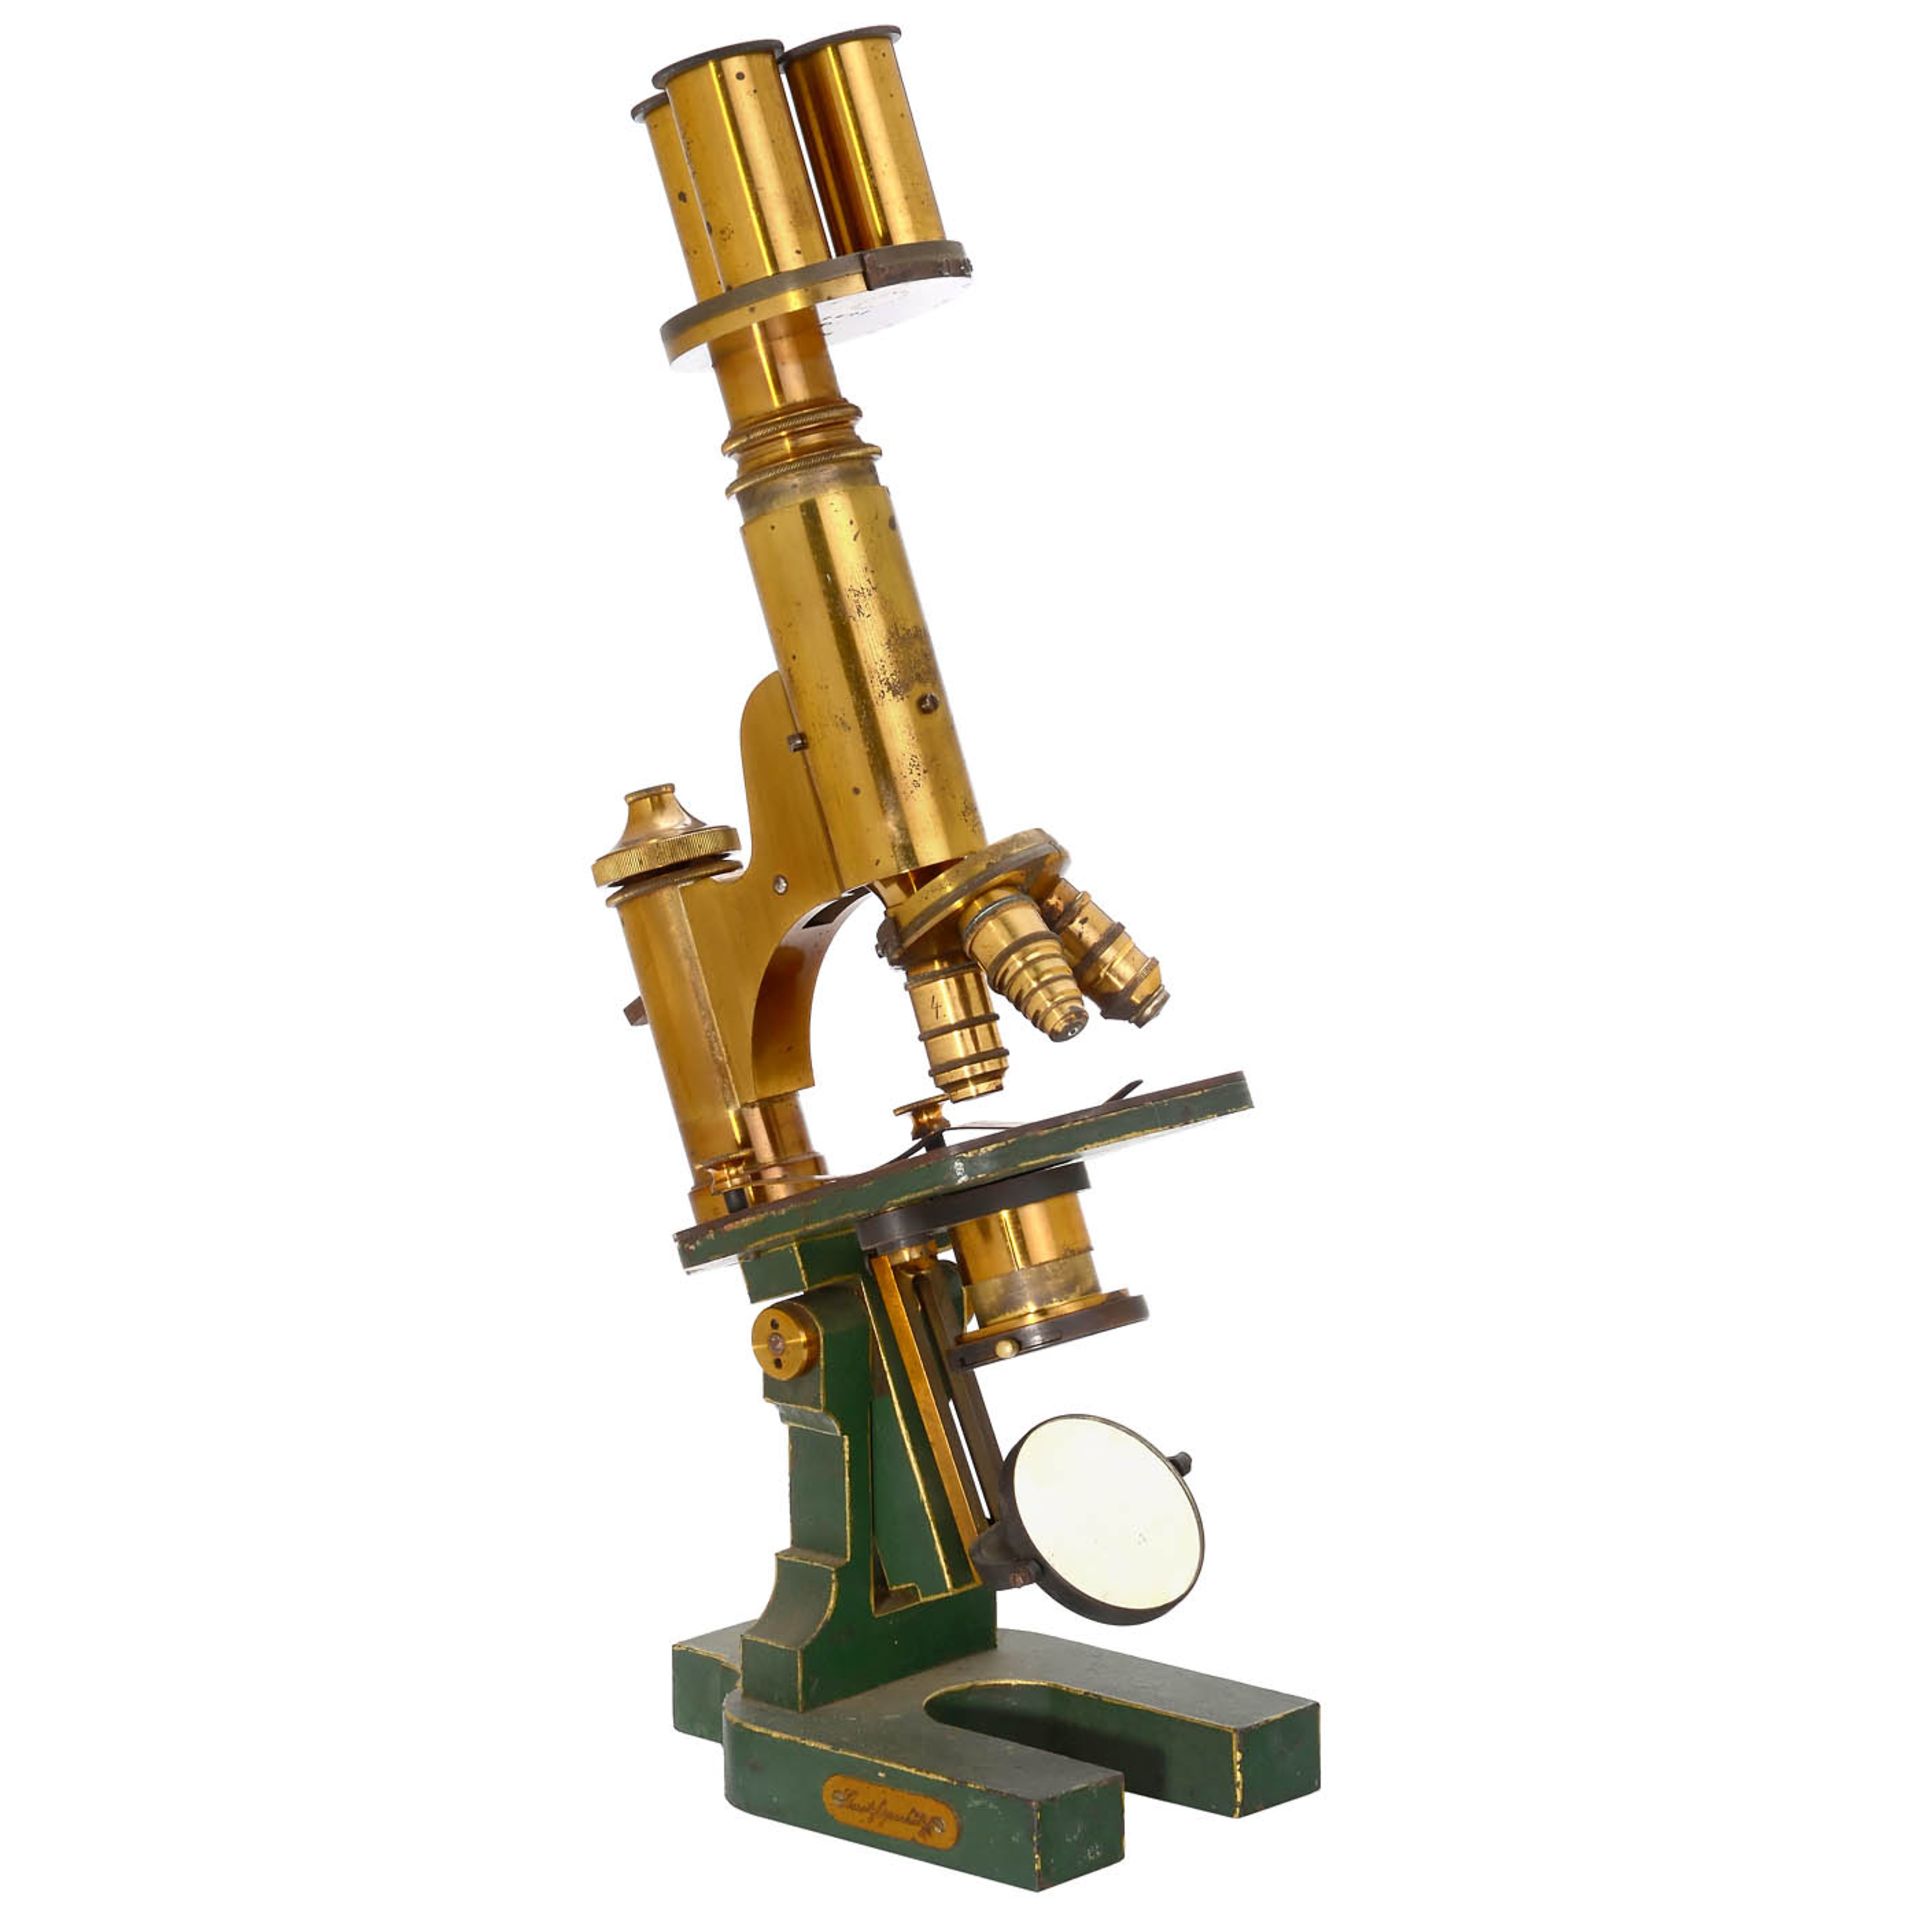 Messter Universal Bacteria Microscope with Eyepiece Turret, pre-1868